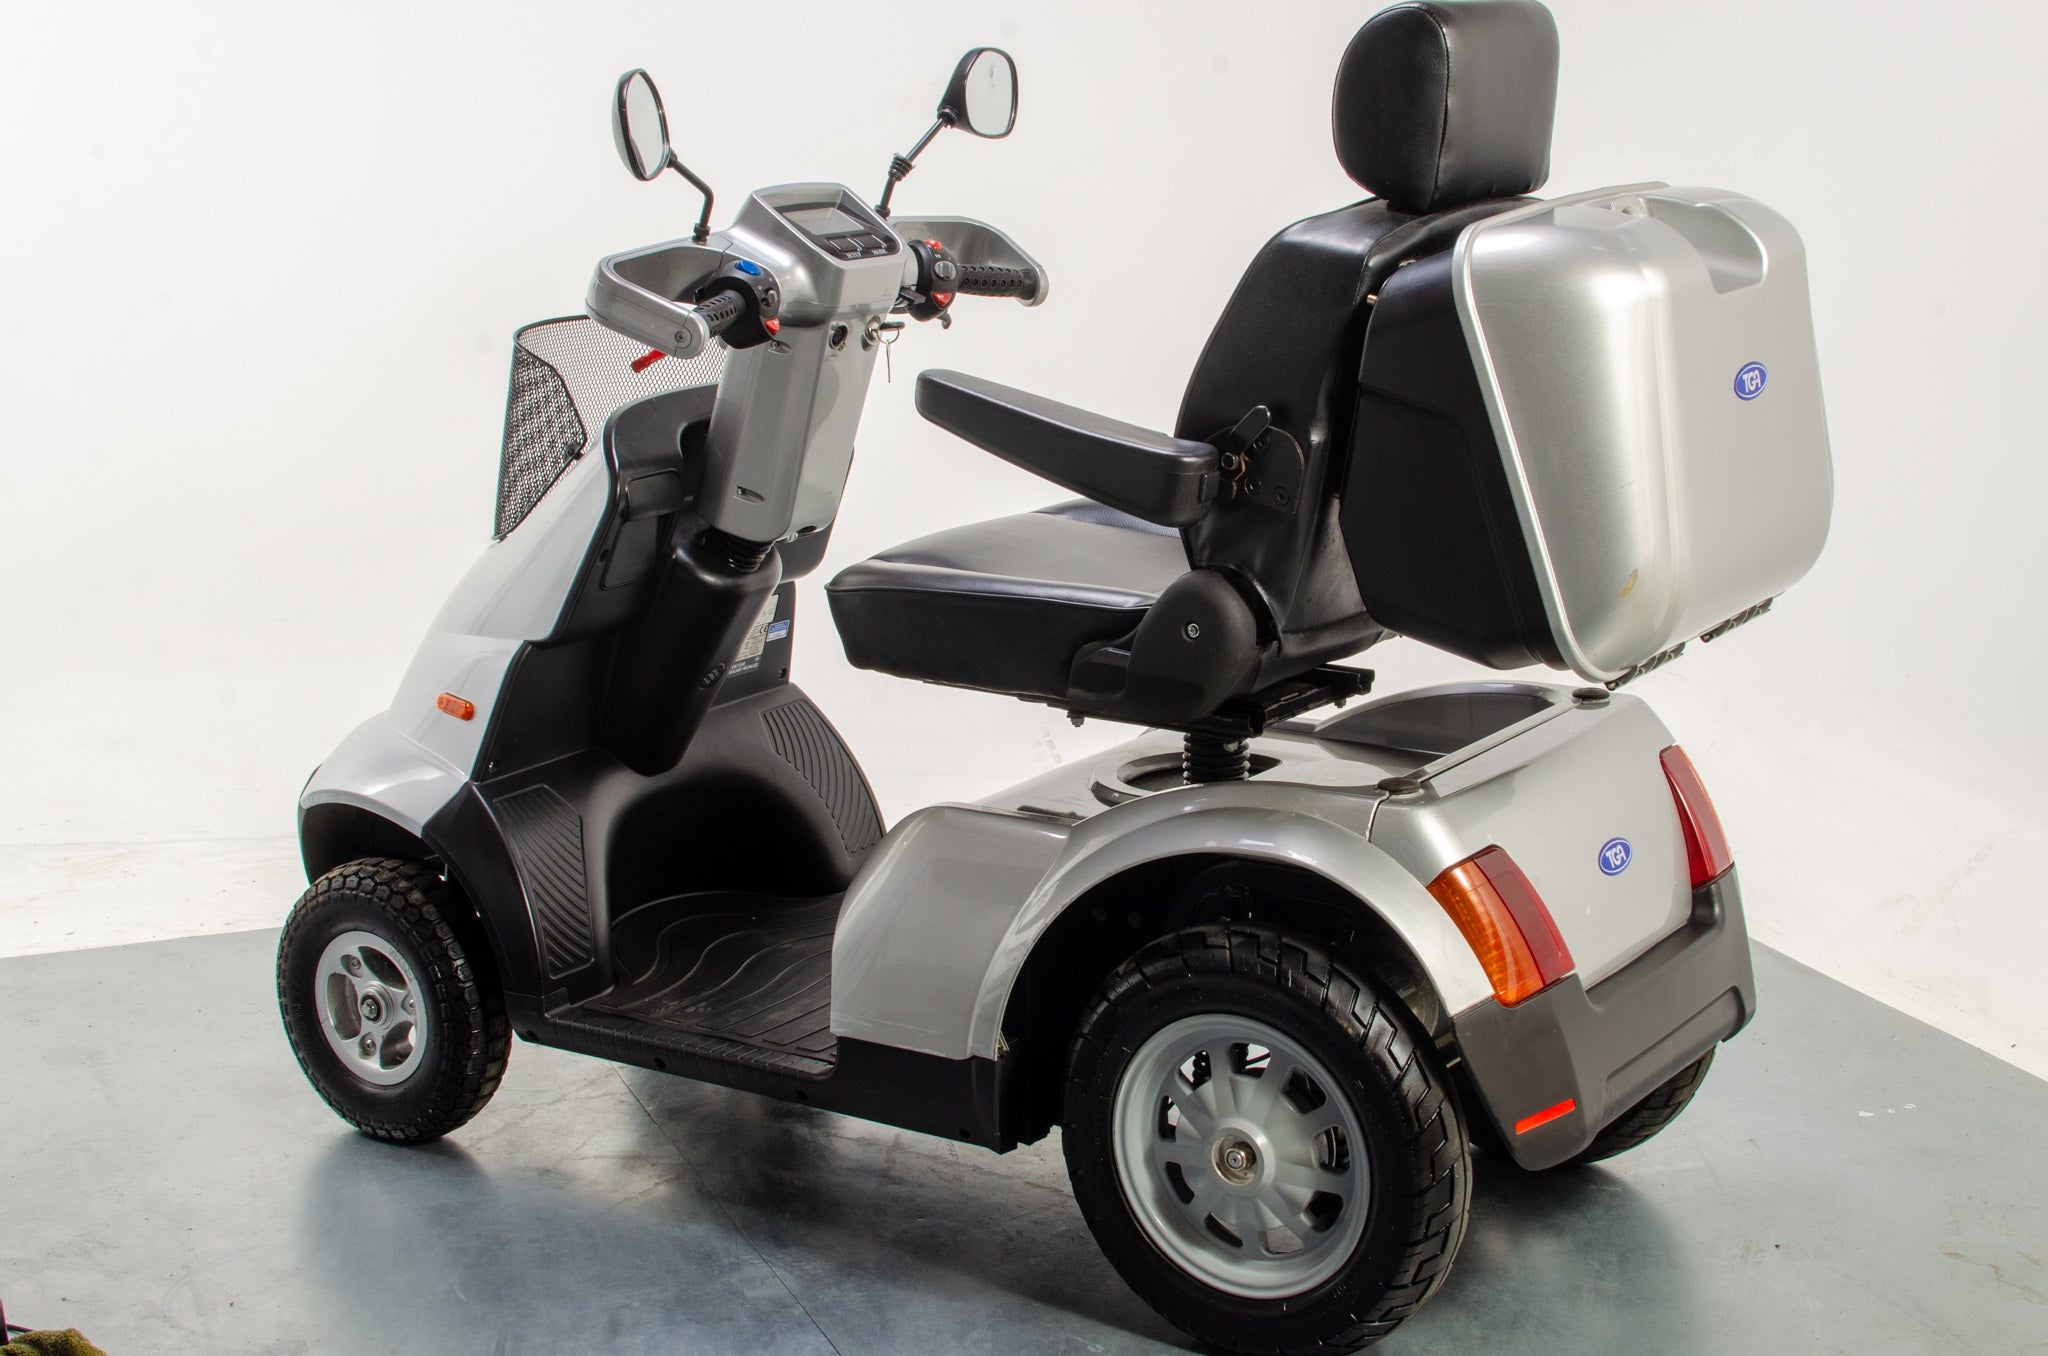 TGA Breeze S4 Used Mobility Scooter 8mph Large All-Terrain Road Legal Off-Road